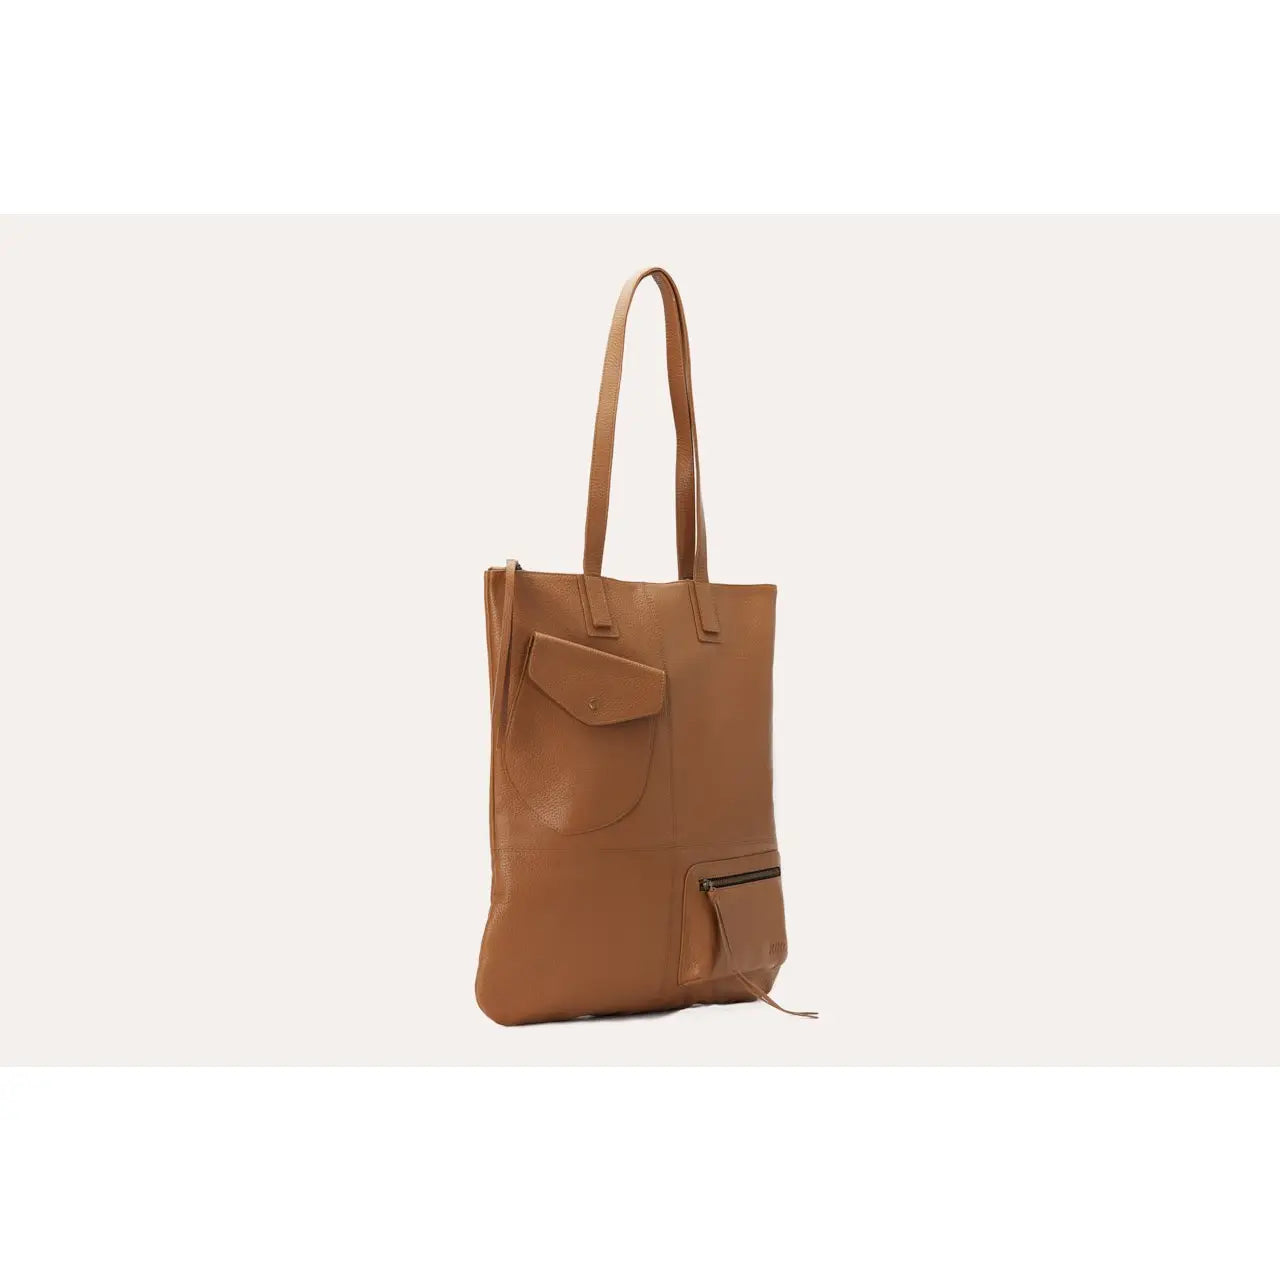 Holden Leather Tote Bag